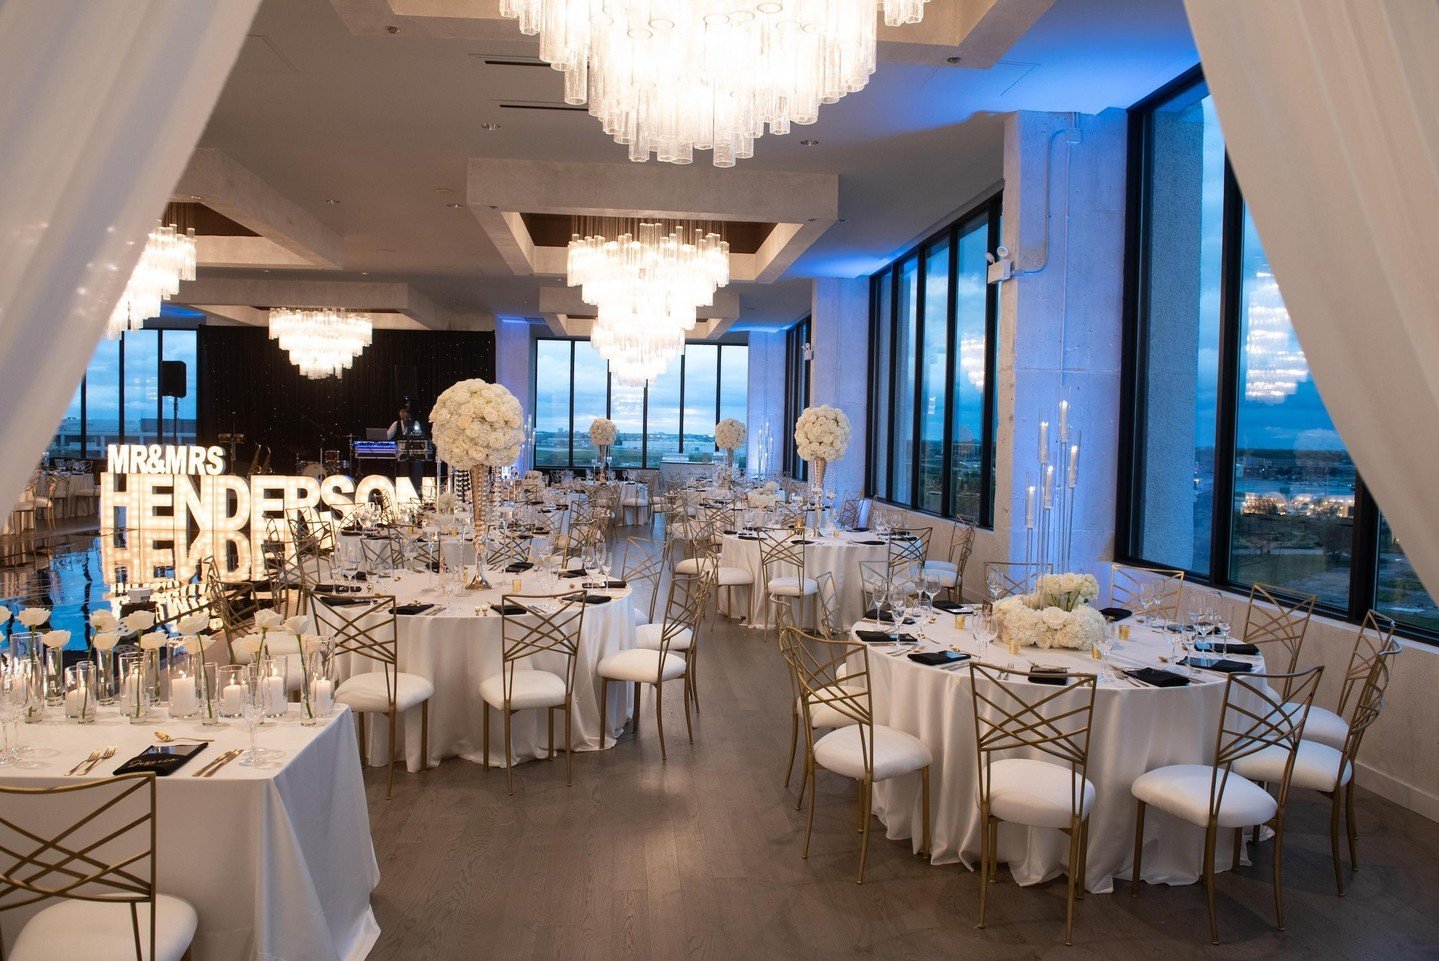 Design opportunities are endless here at Sky on Nine! We love this classic modern black &amp; white decor from A &amp; S&rsquo;s wedding! 

📸 @bartgalbasphotography
💐 @designdeflores
🥂 @designs_by_bianca
.
.
.
#chicagowedding #RosemontIL #weddingd